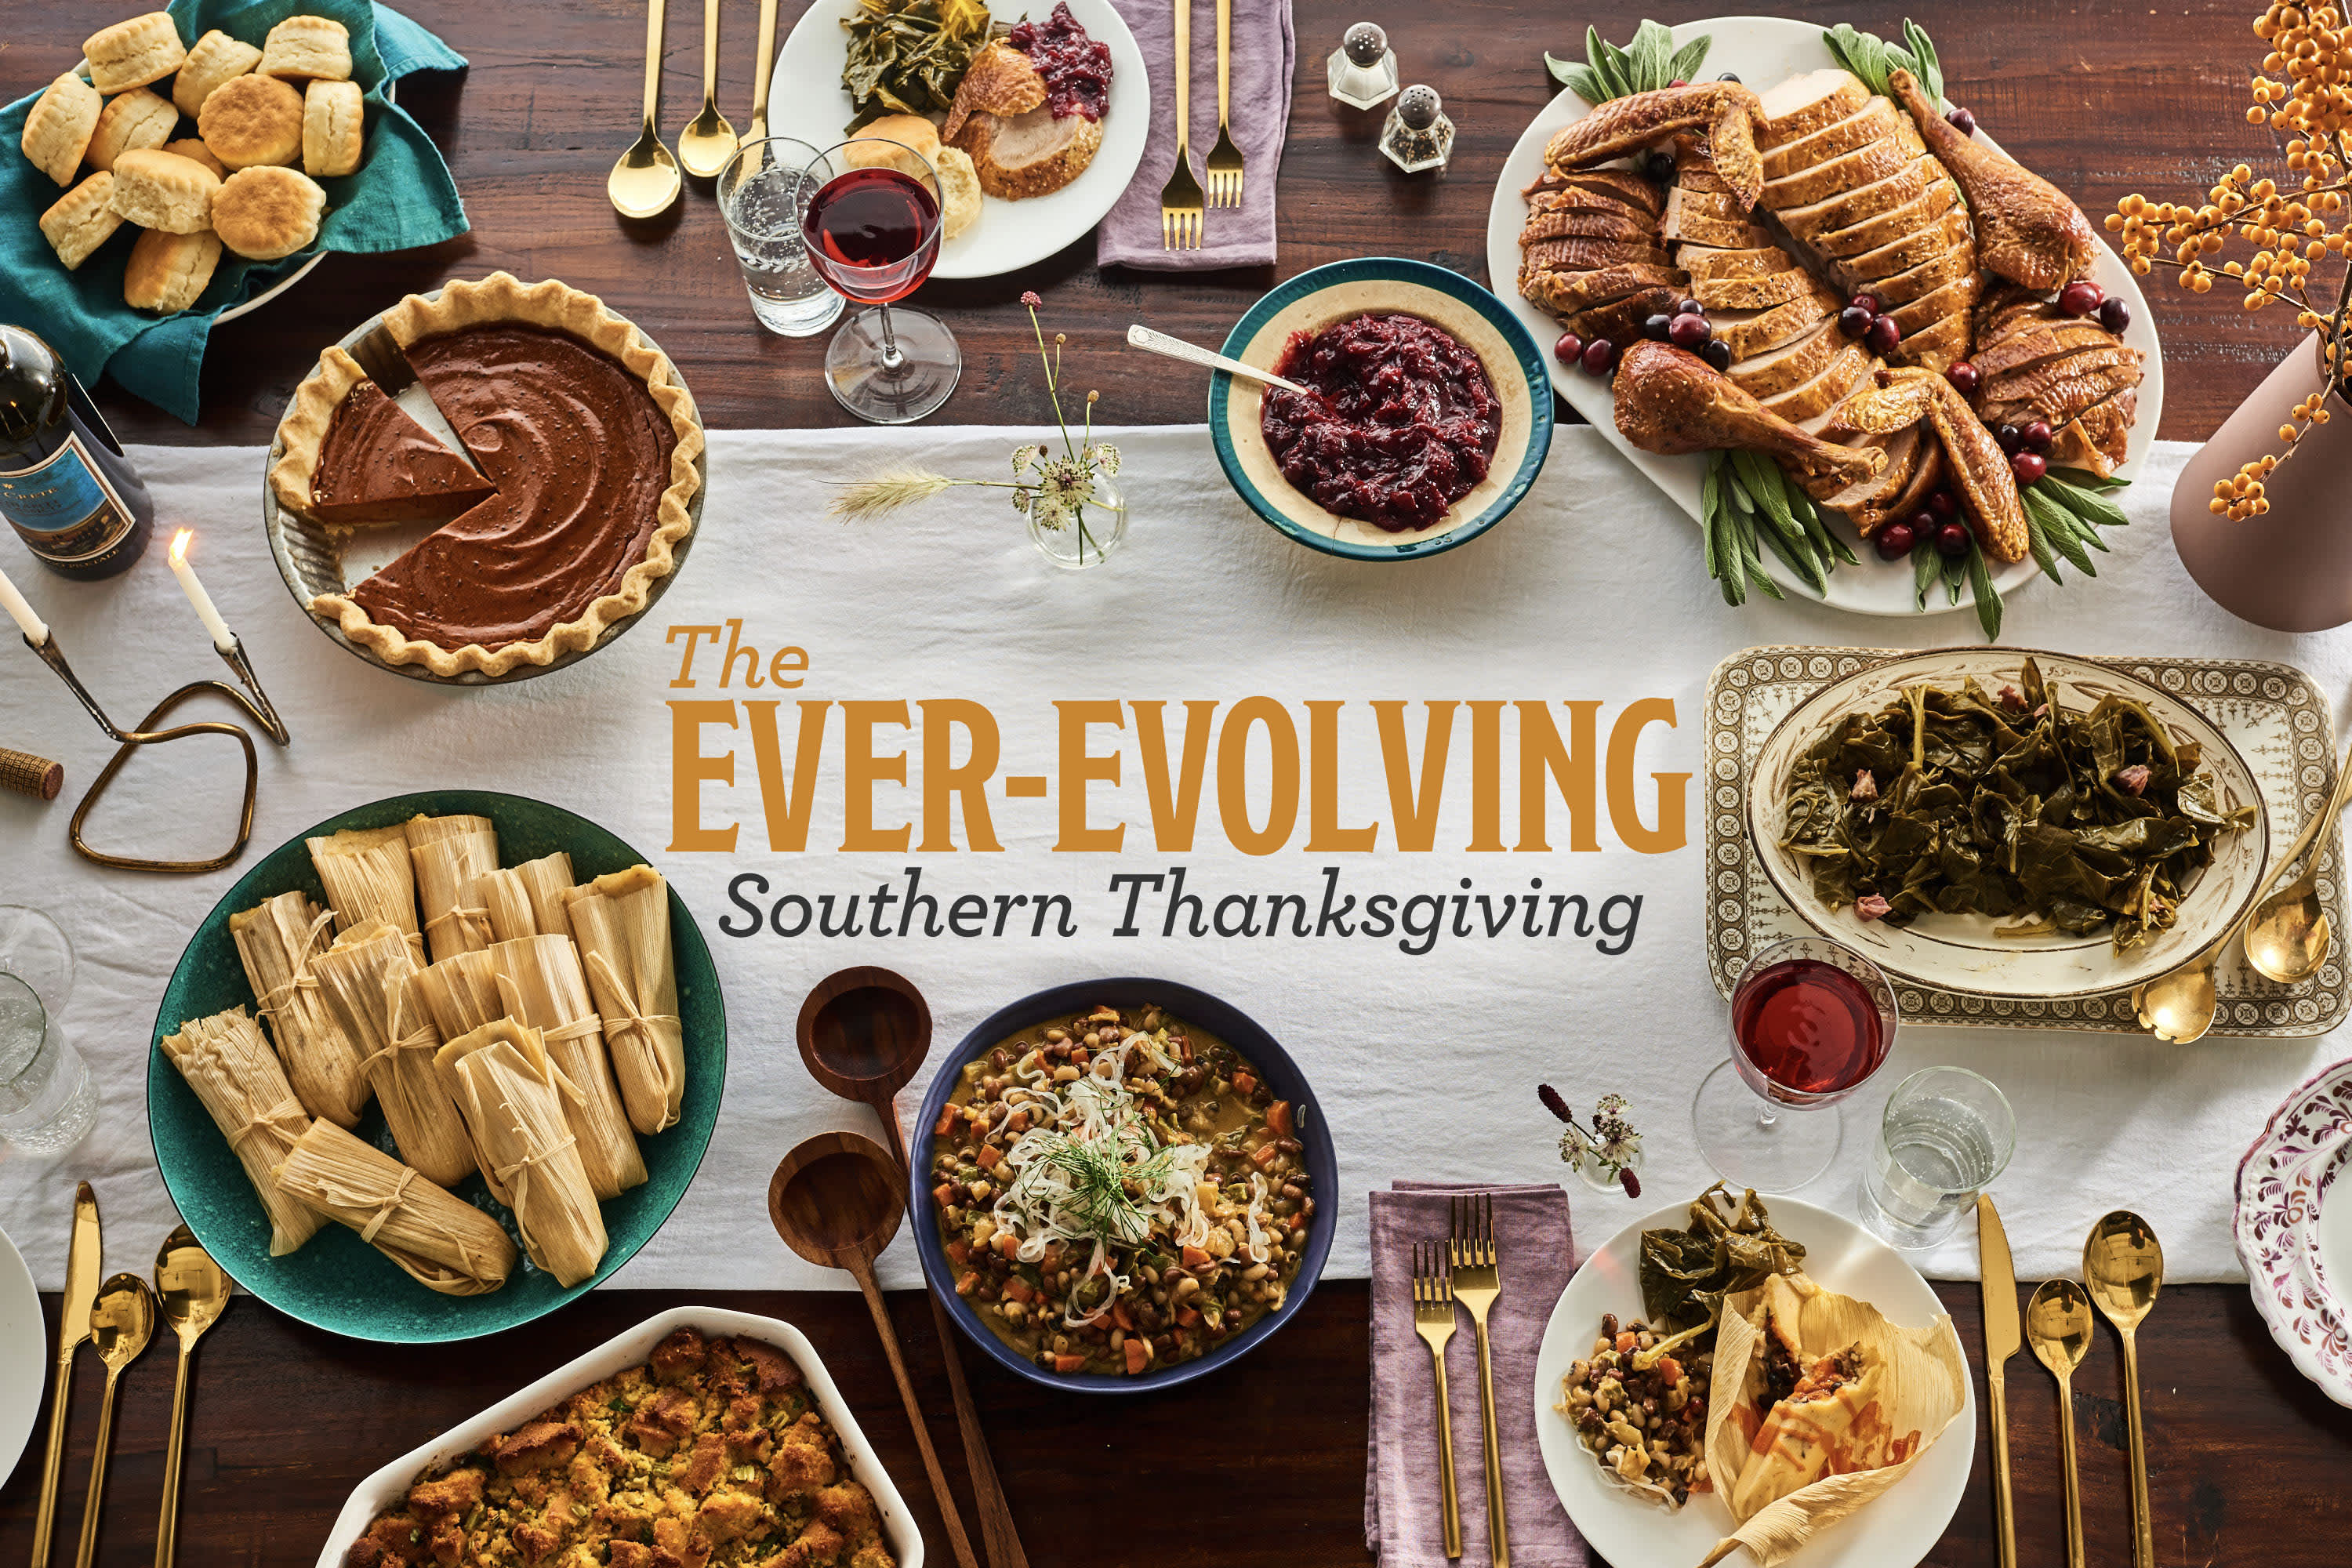 Recipes for a Traditional Southern Thanksgiving Dinner Menu